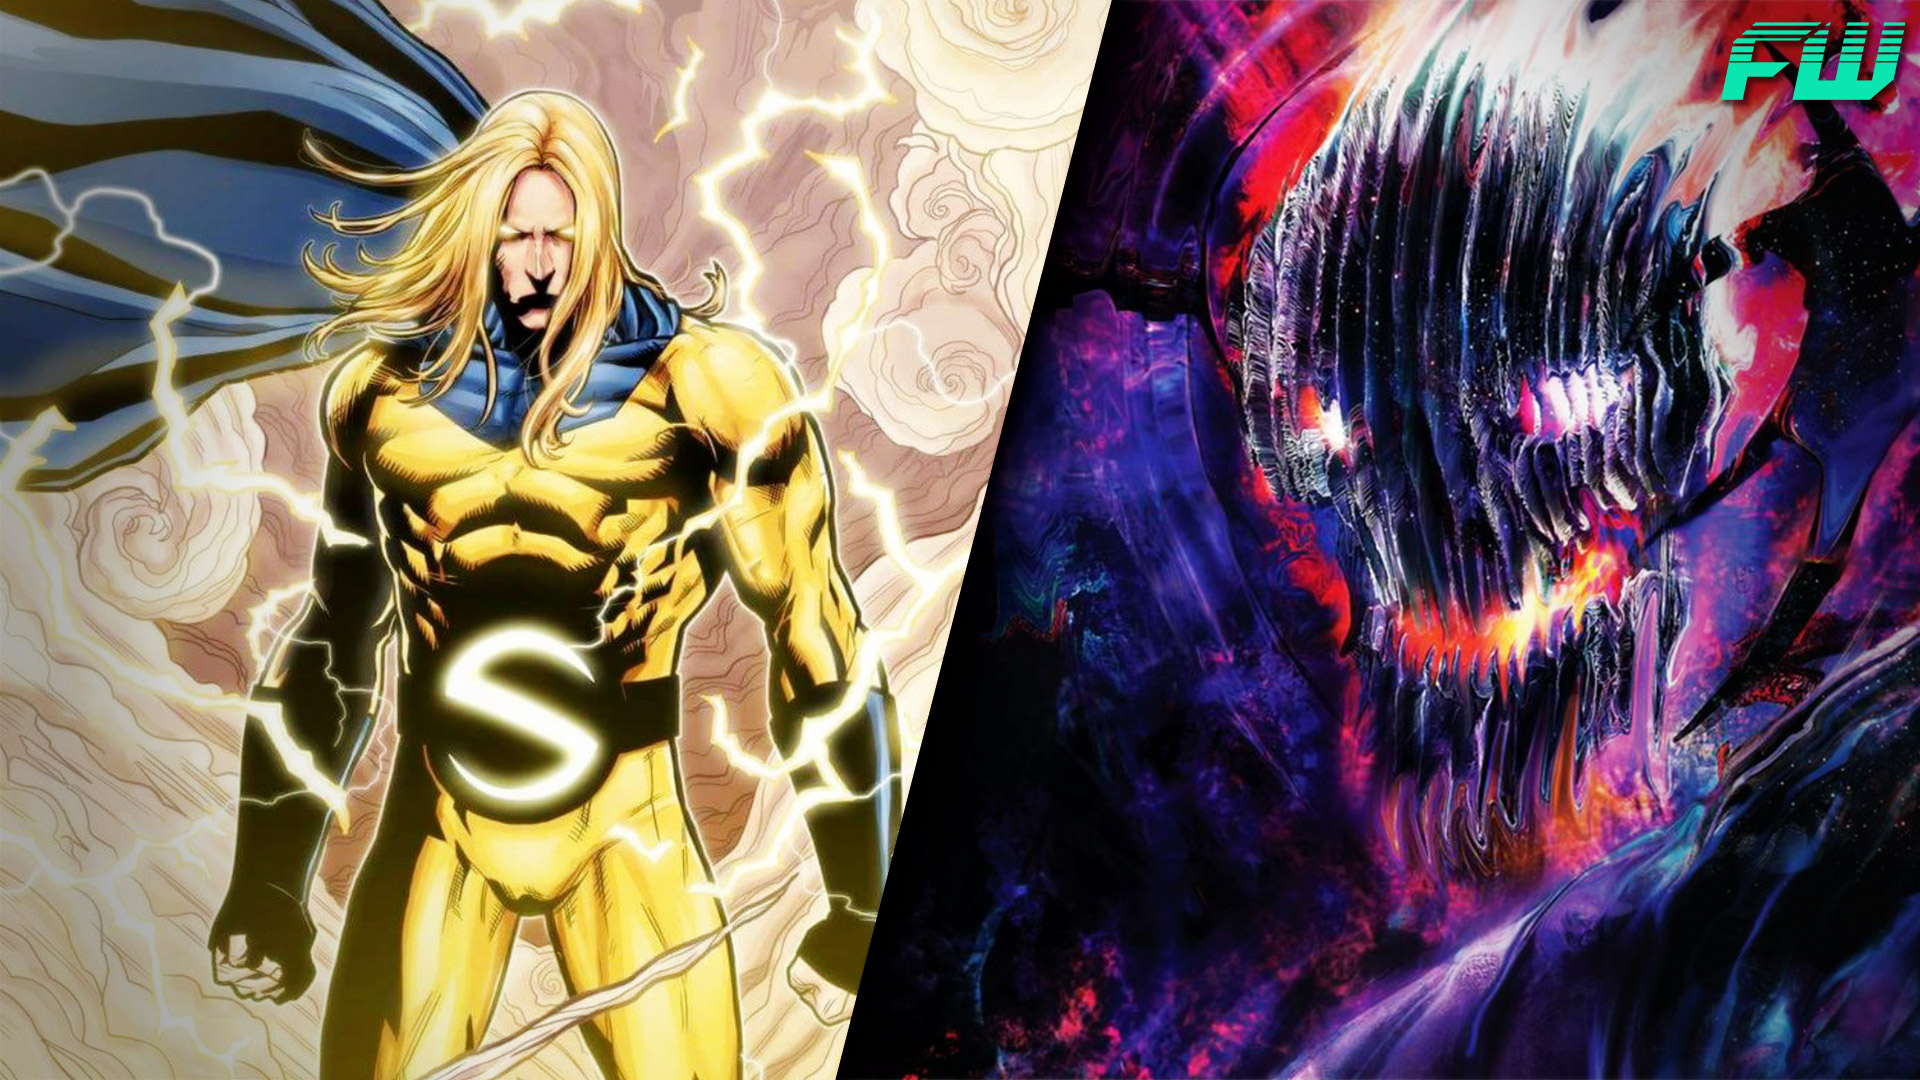 10 overpowered anime heroes who could conquer the universe (If